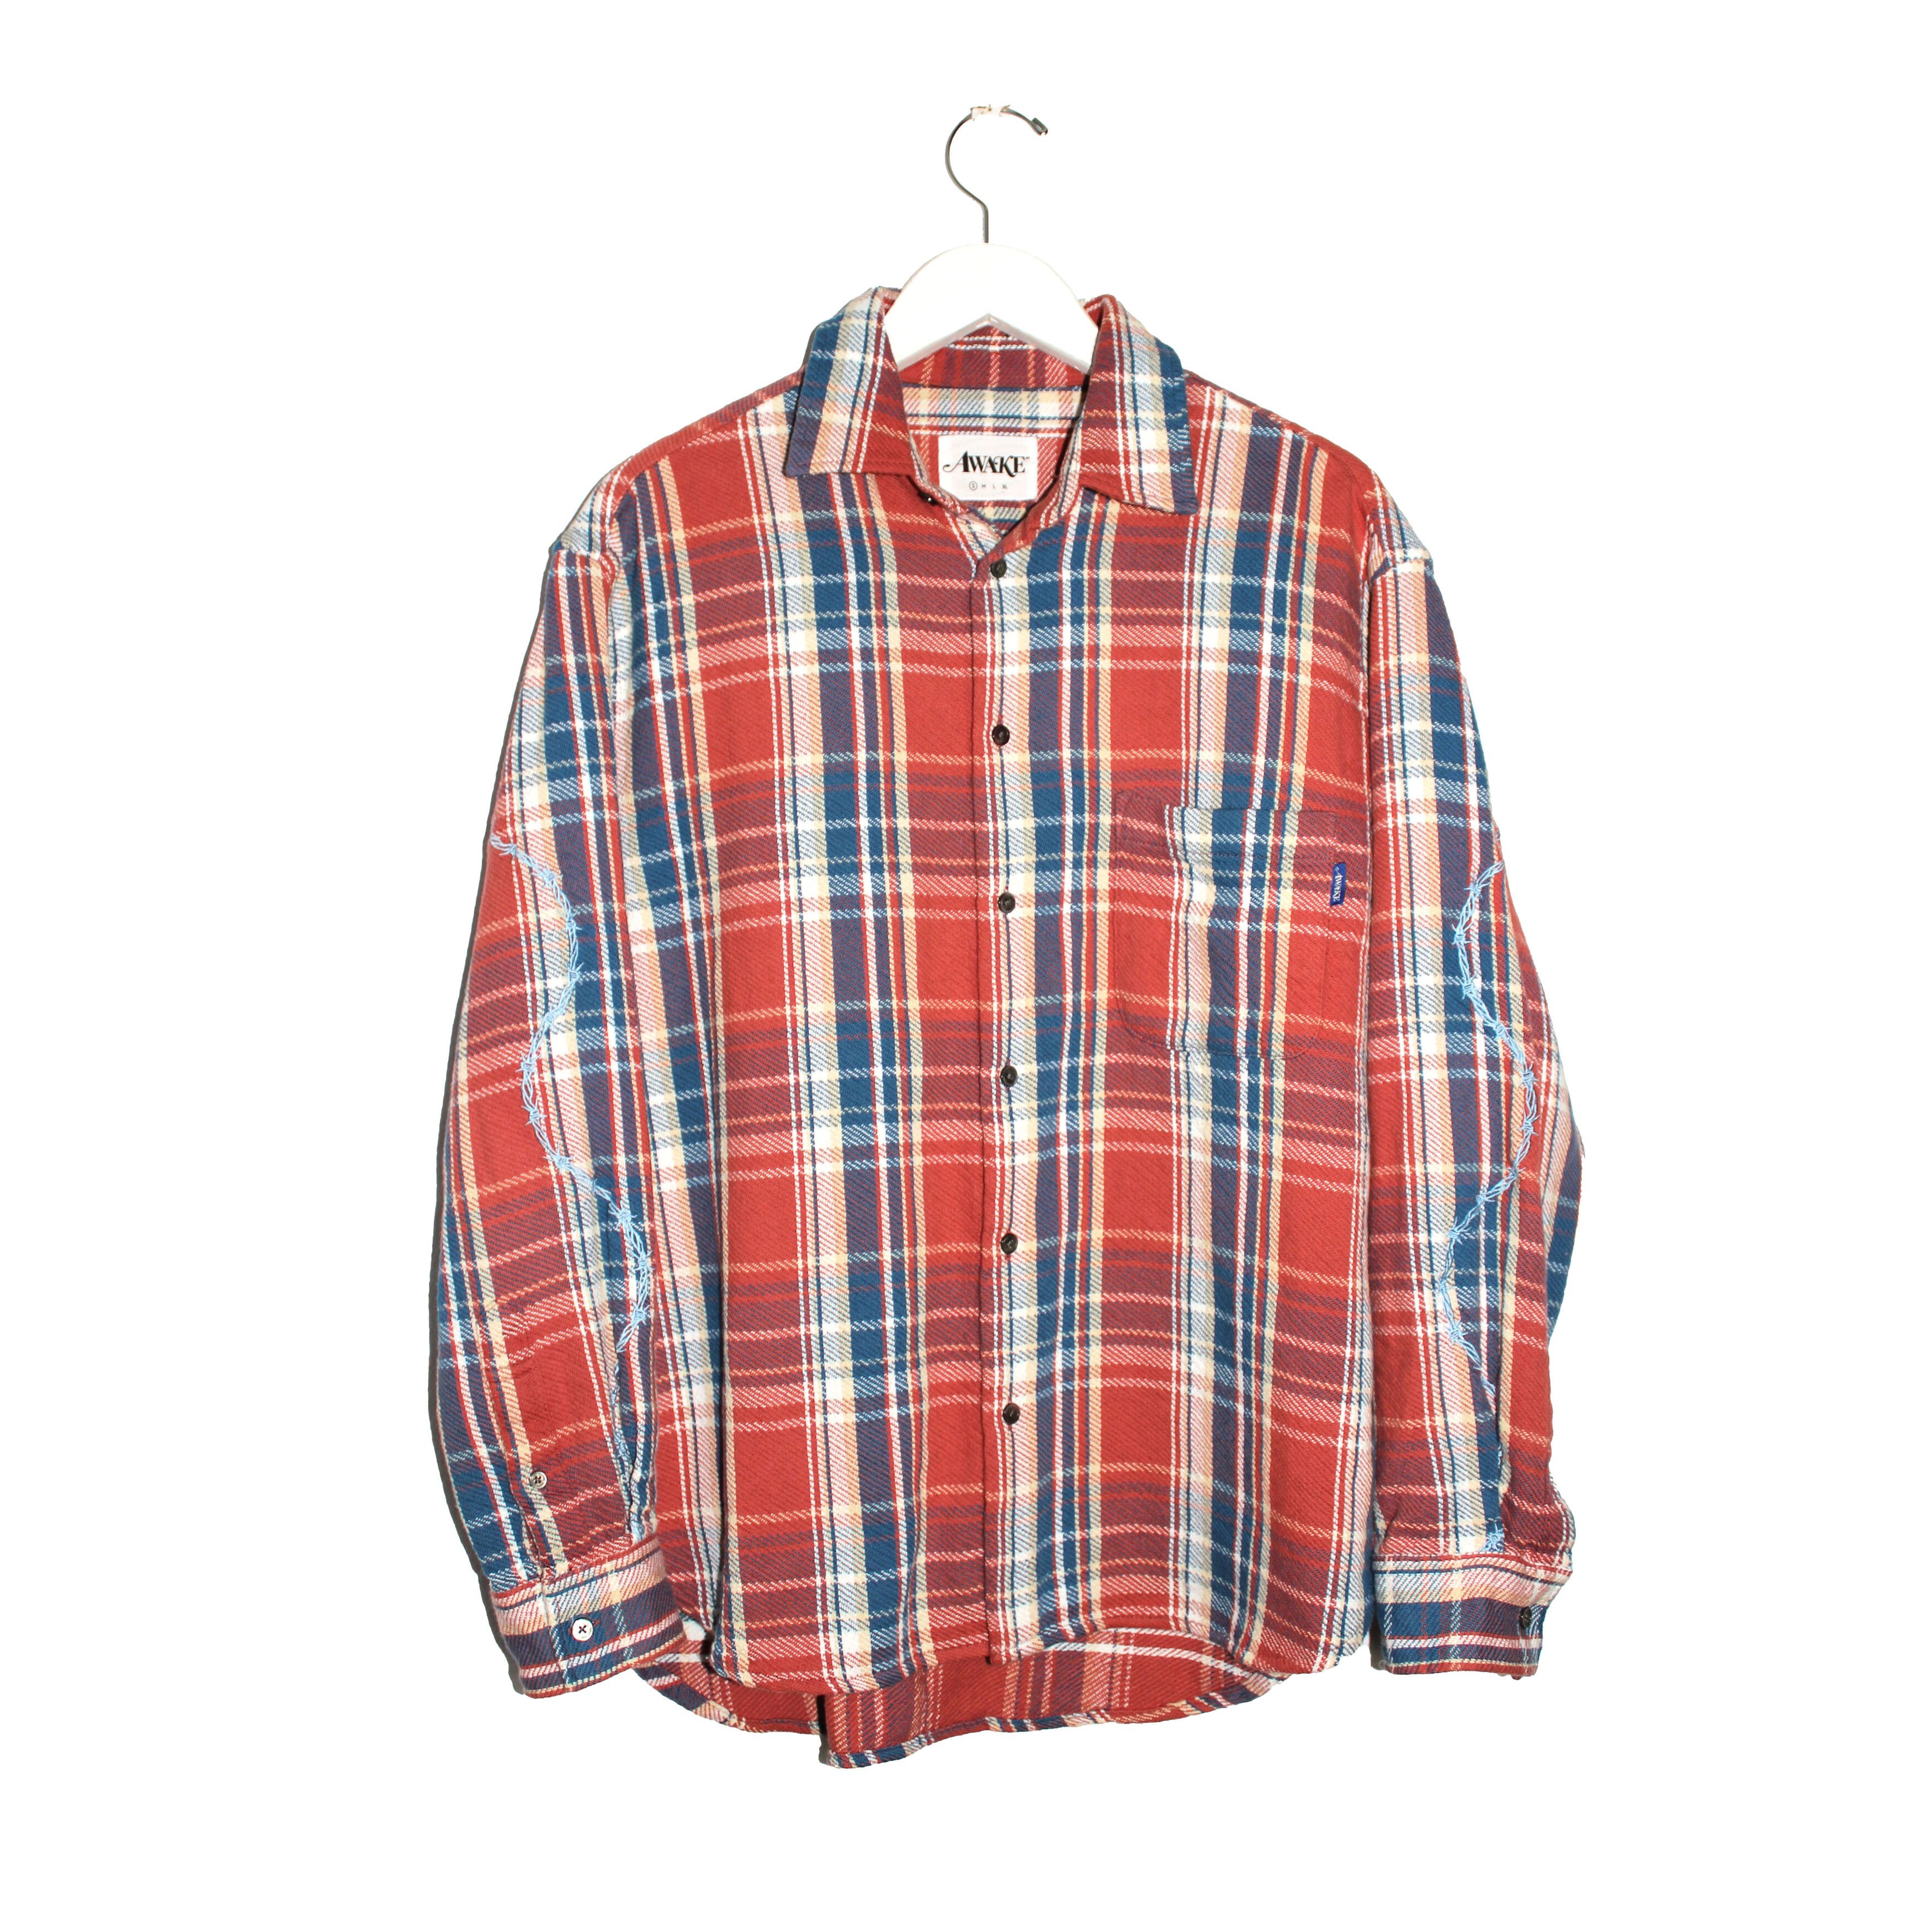 Awake Heavyweight Barbed Wire Back Flannel Size US S / EU 44-46 / 1 - 1 Preview